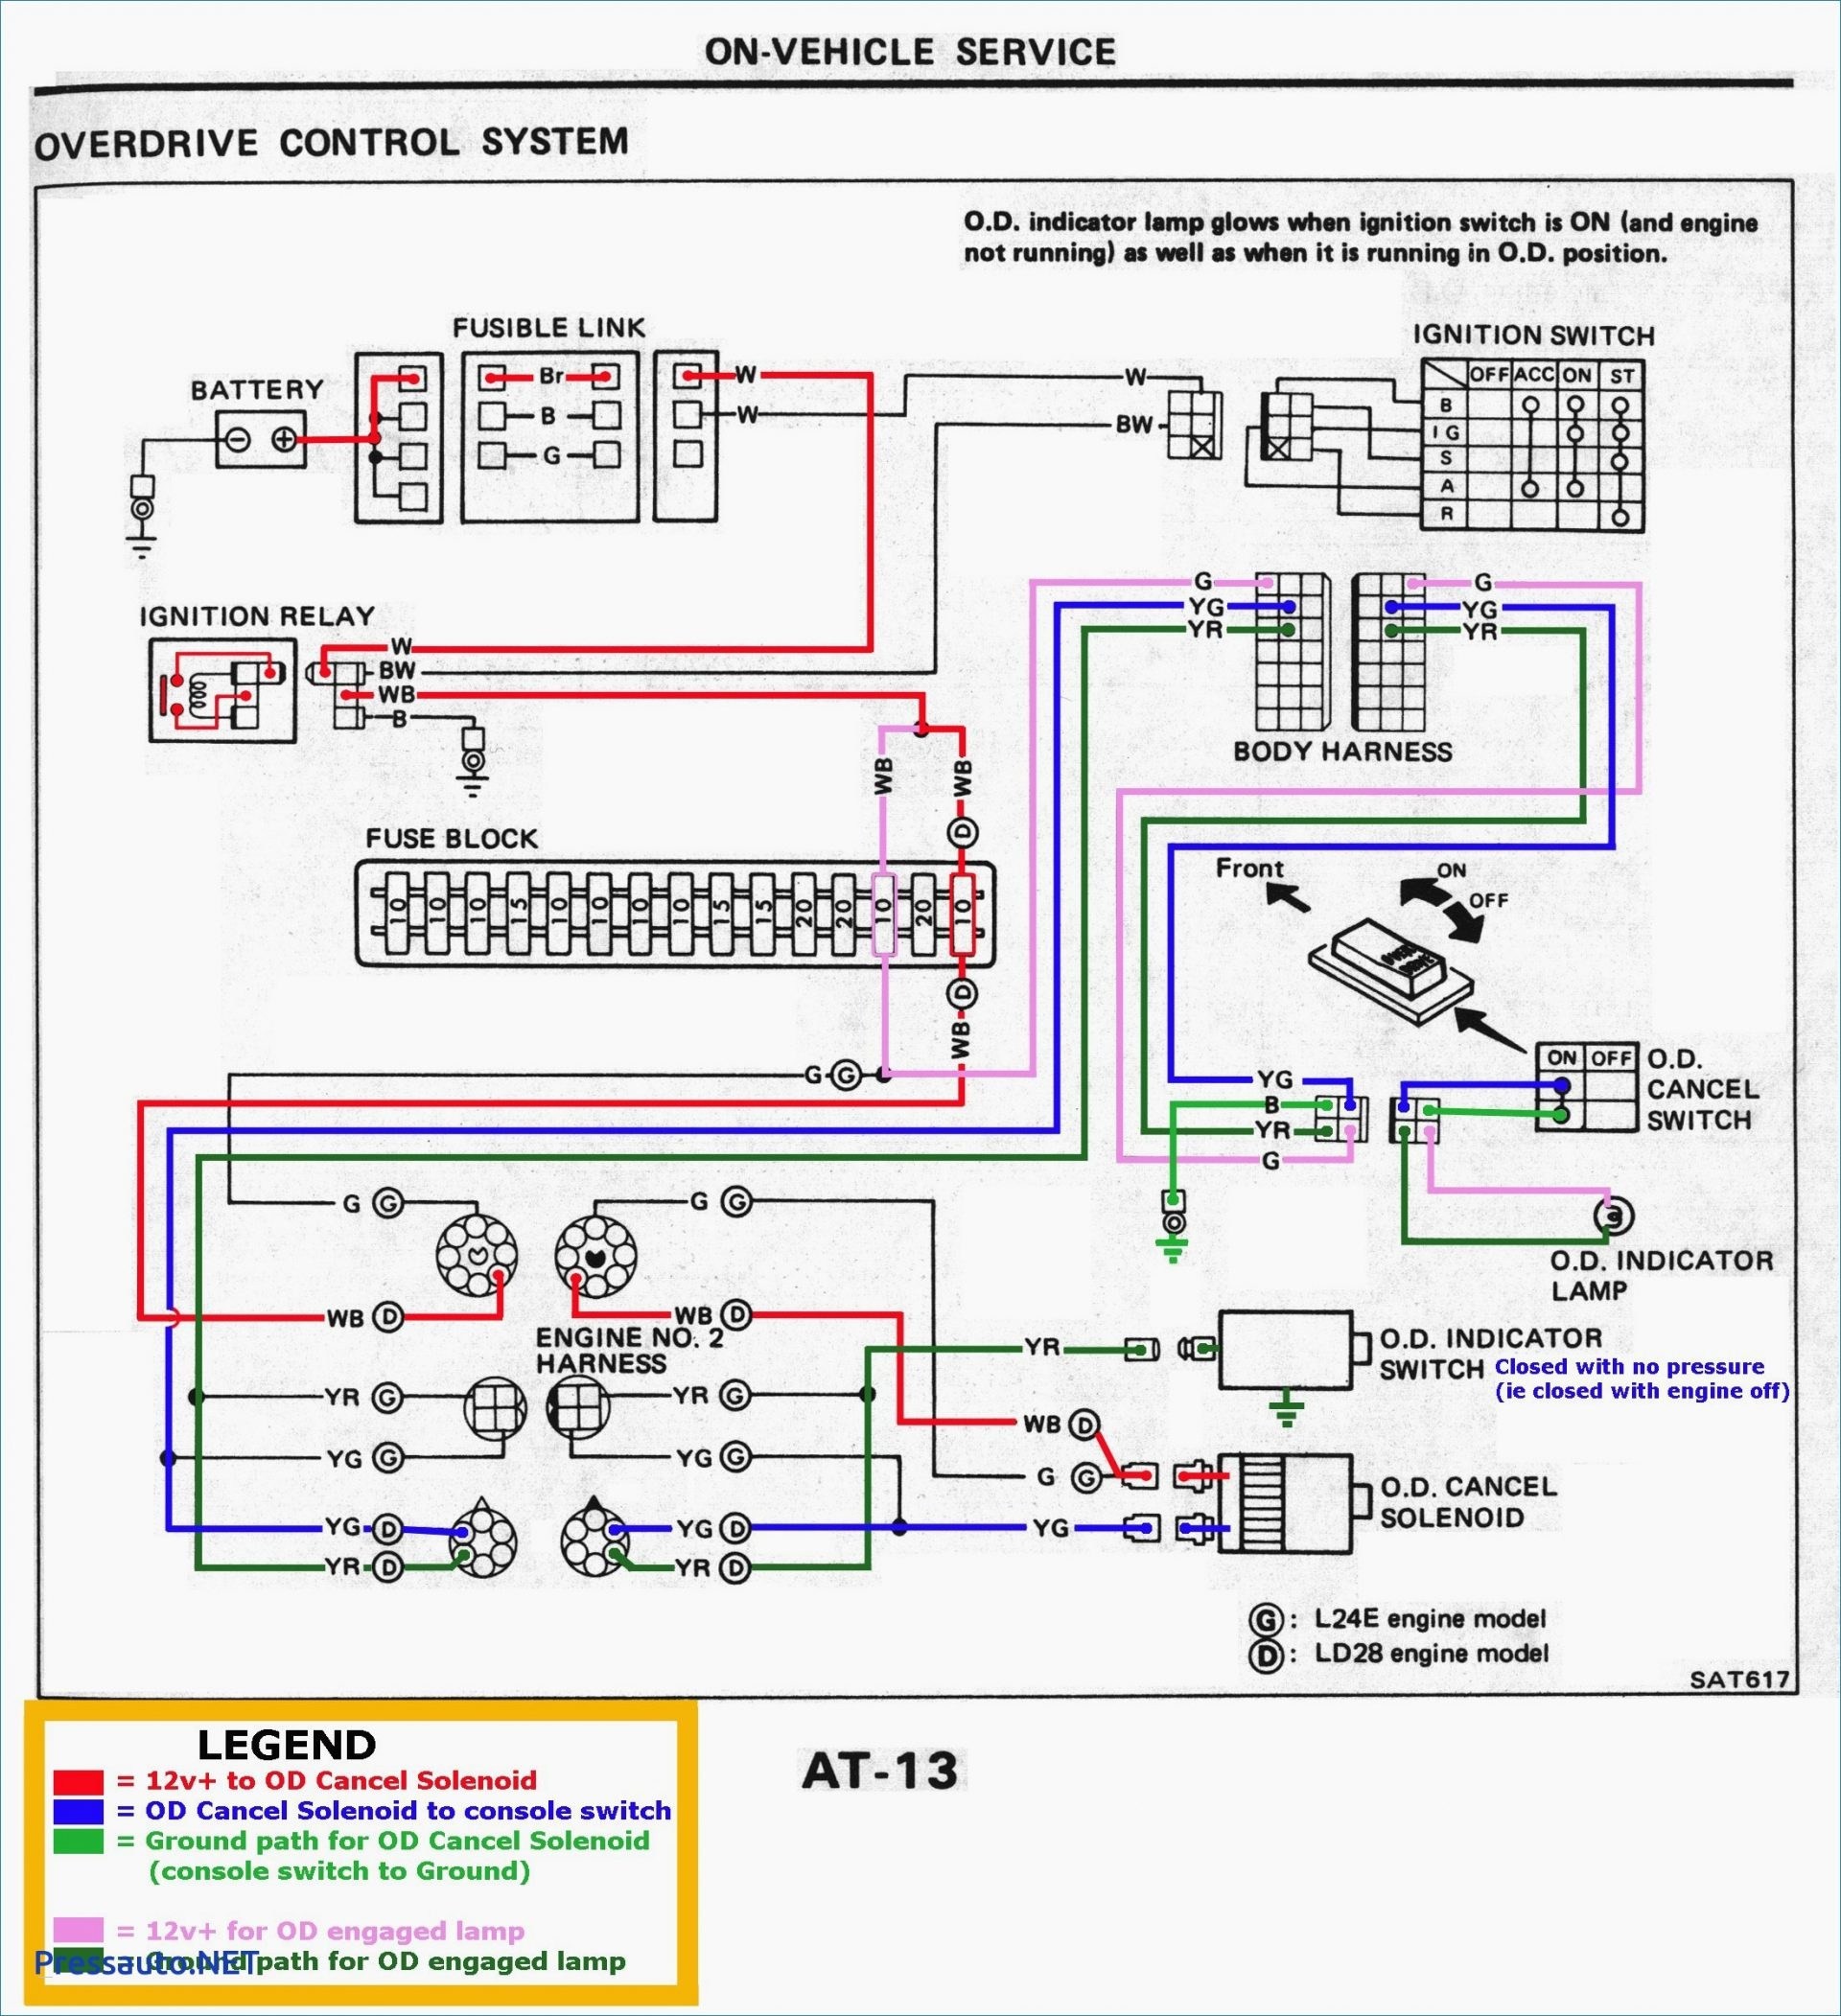 2004 toyota Sequoia Parts Diagram toyota Parts Diagrams Reference Car Wiring Diagrams Explained • Of 2004 toyota Sequoia Parts Diagram